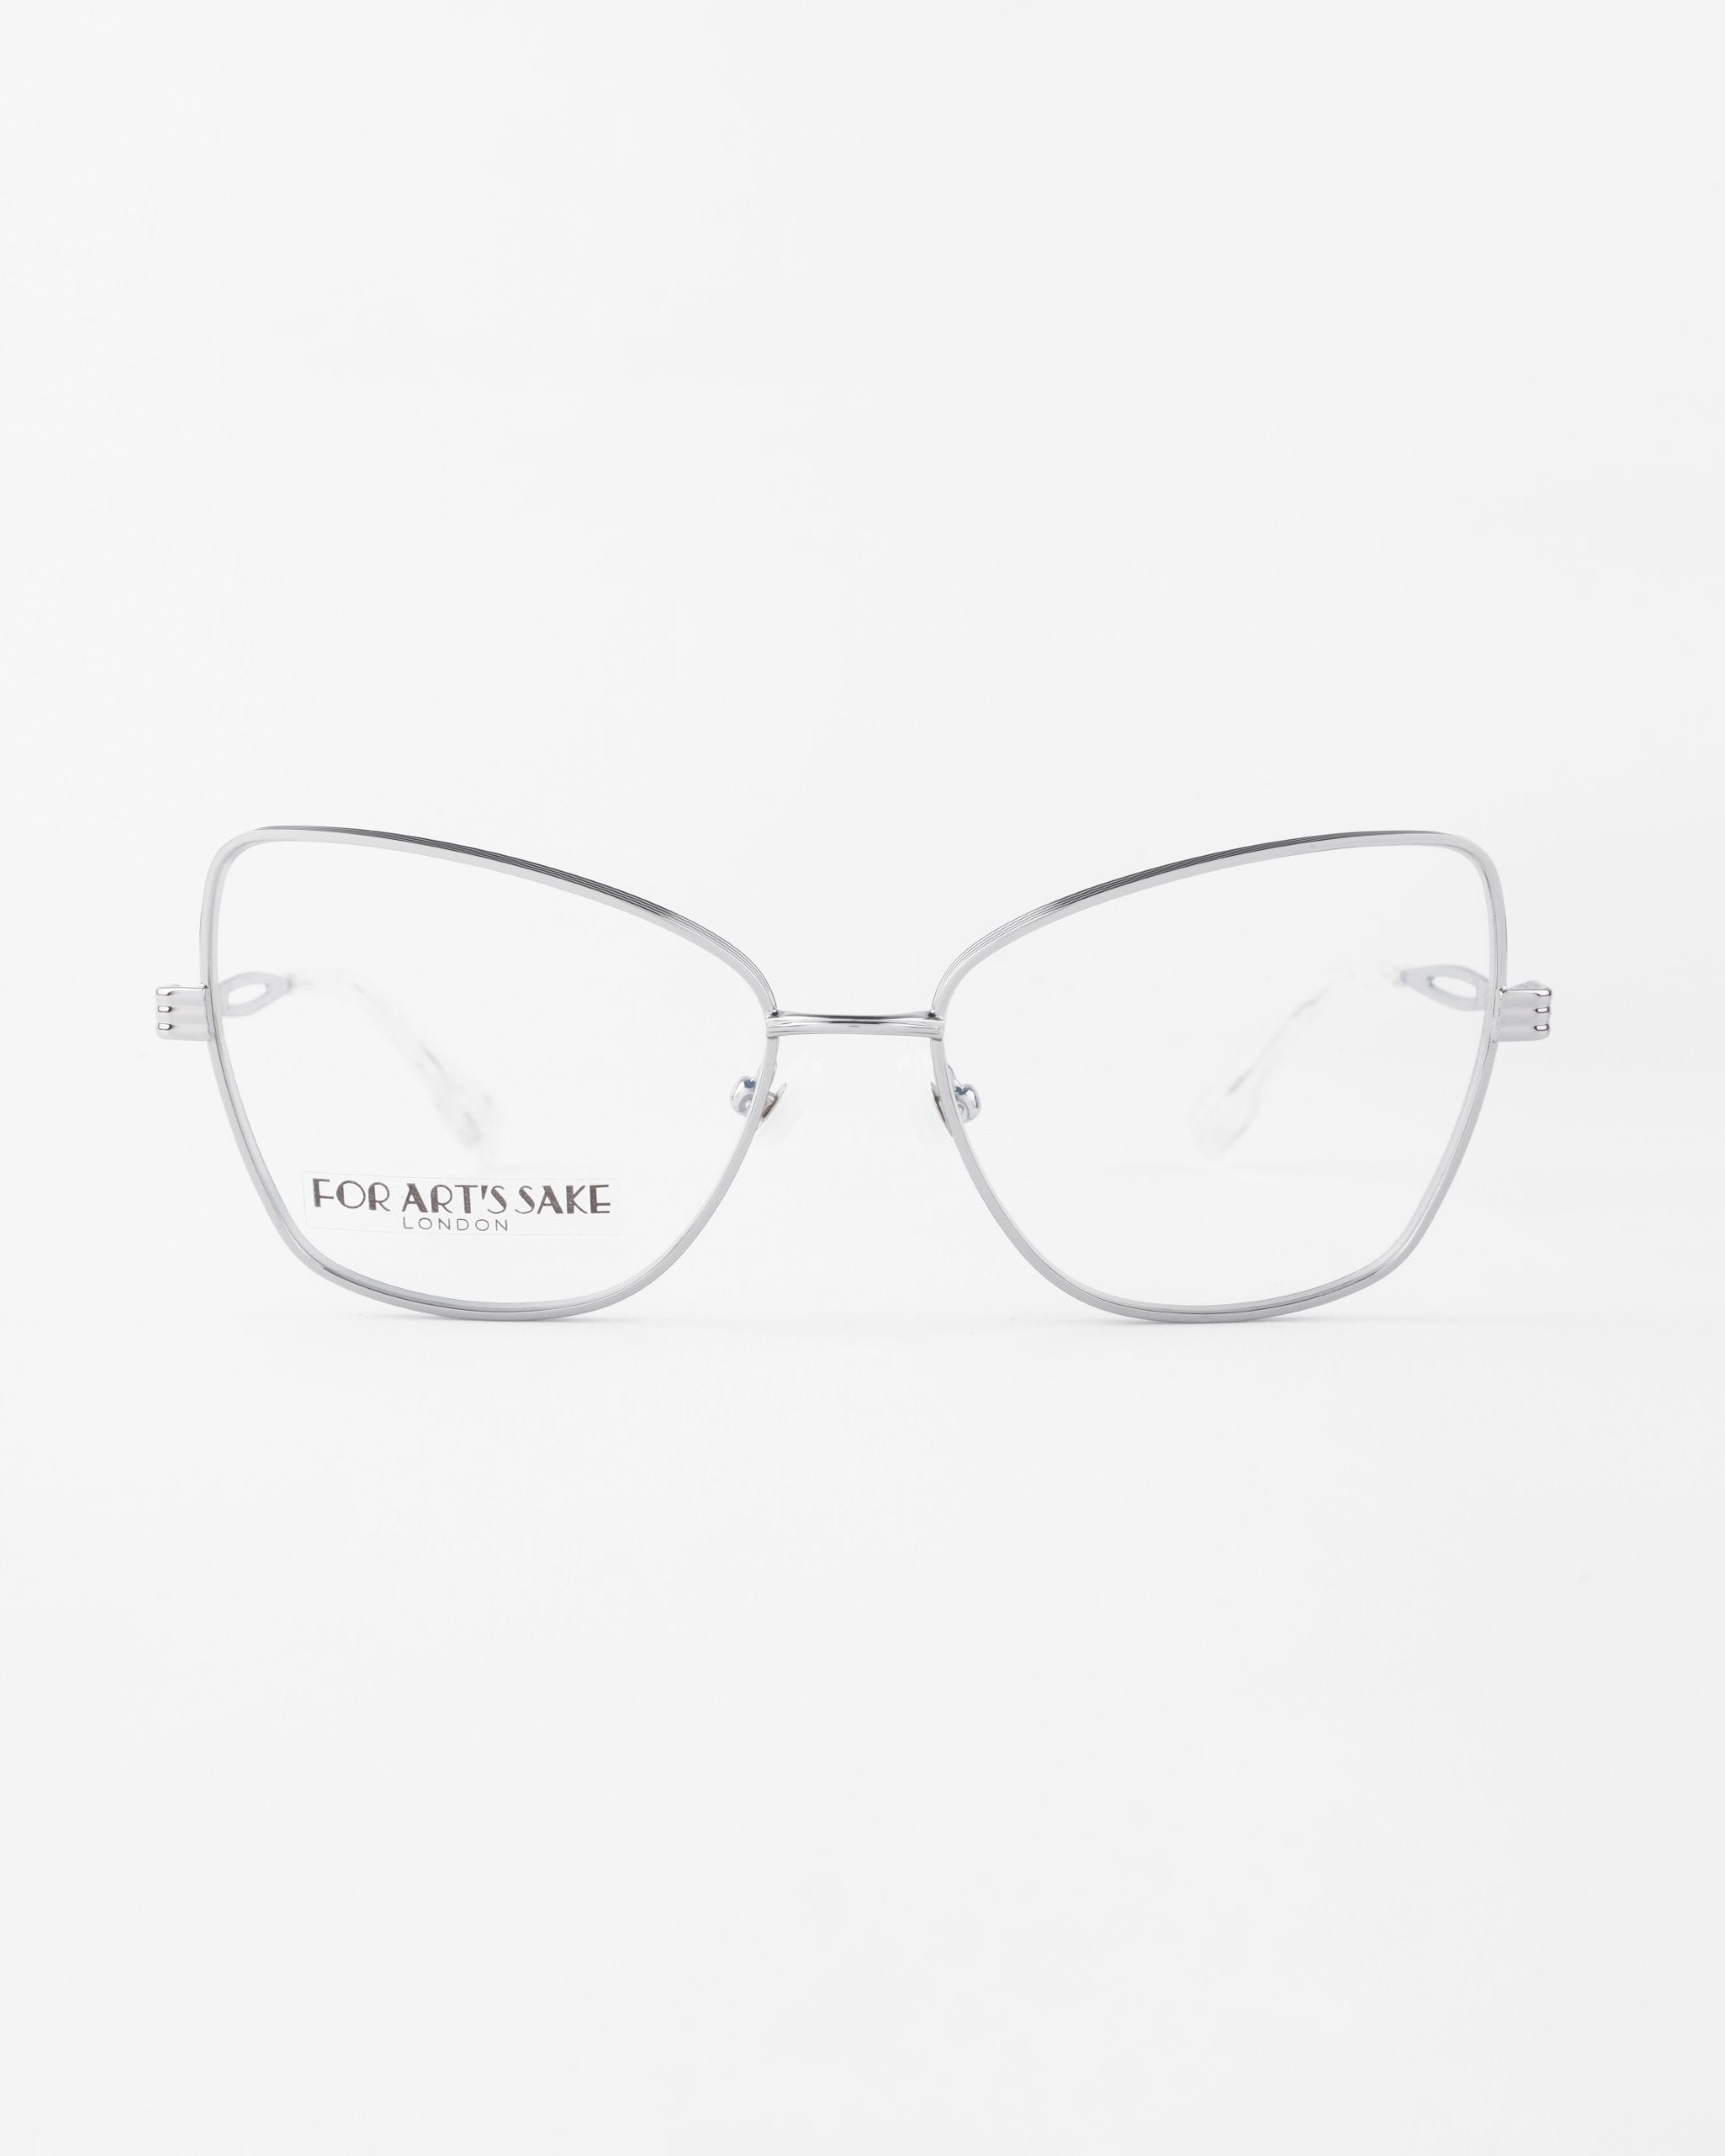 Clear cat-eye eyeglasses with thin, silver metal frames and the phrase &quot;FOR ART&#39;S SAKE LONDON&quot; inscribed on the left lens. Featuring prescription lenses, these chic Lady by For Art&#39;s Sake® glasses are set against a plain white background.